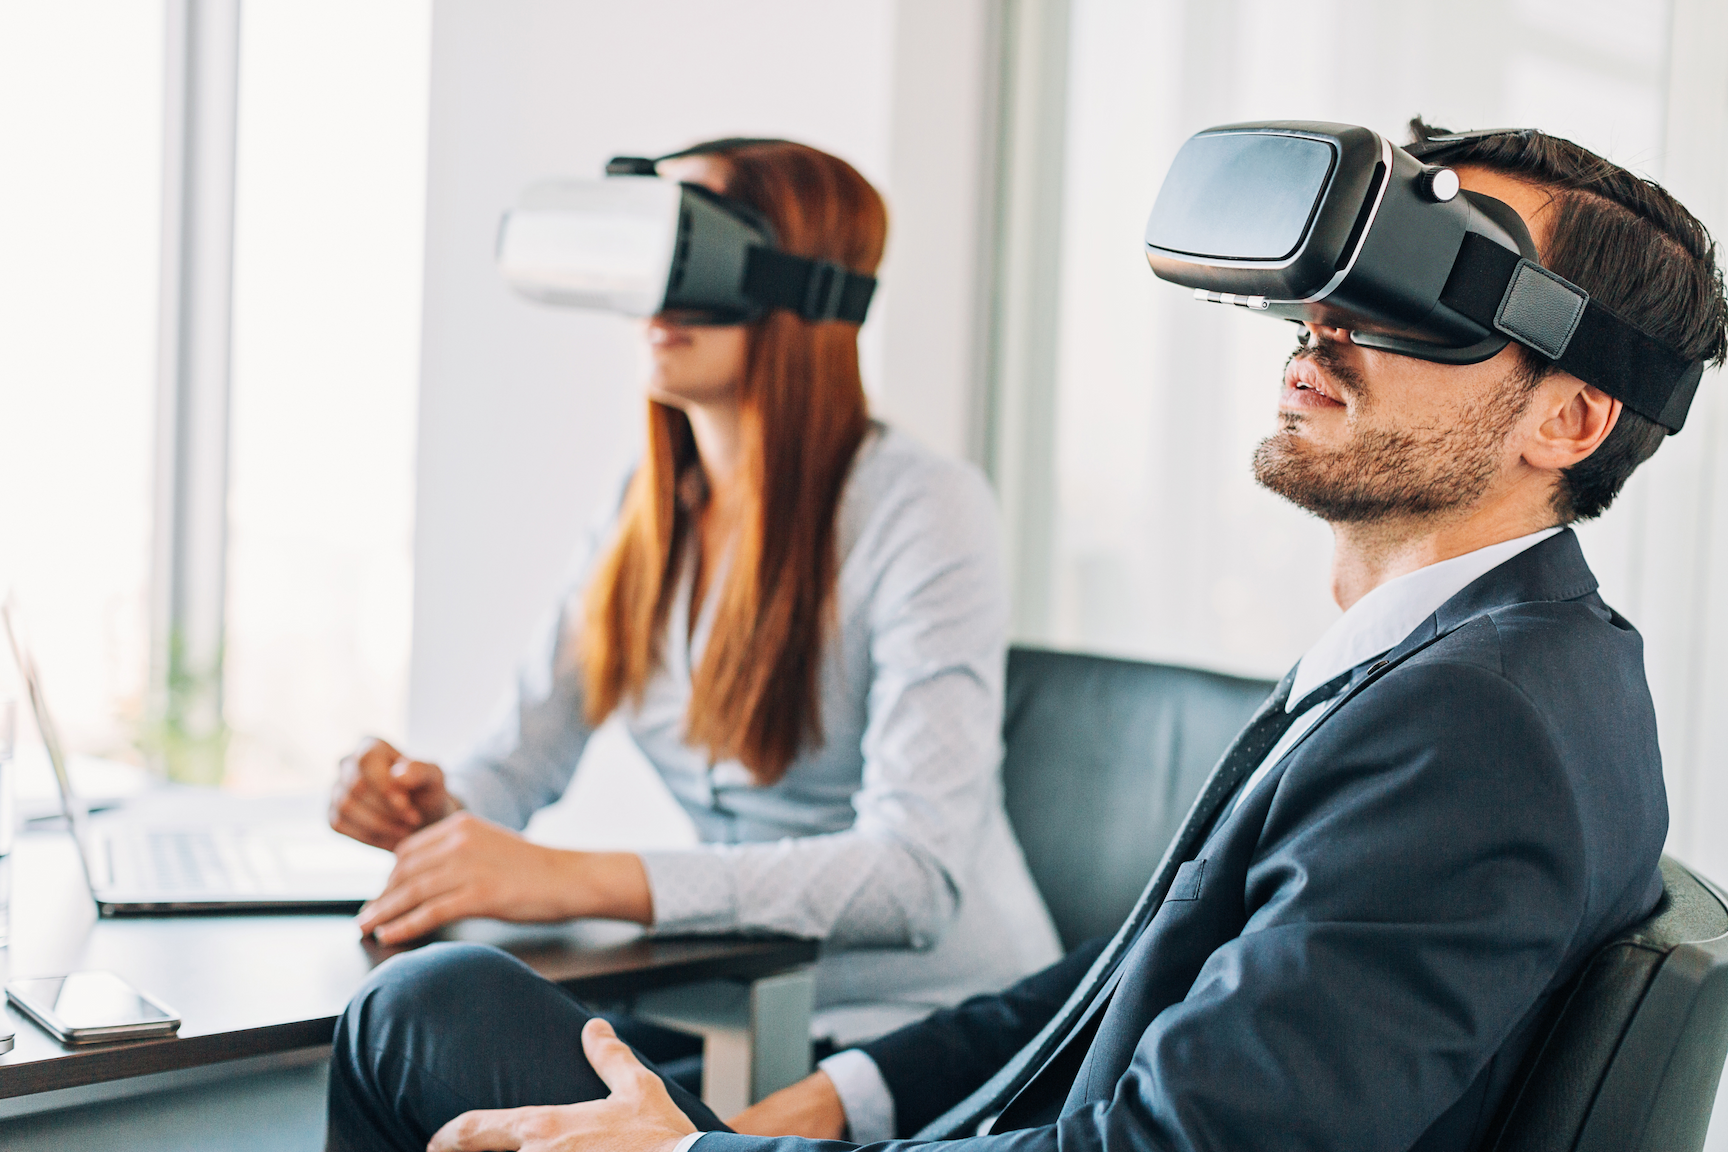 A VR sales system provides a unique and interactive experience for customers, allowing them to explore products in a virtual environment and make more informed purchase decisions.